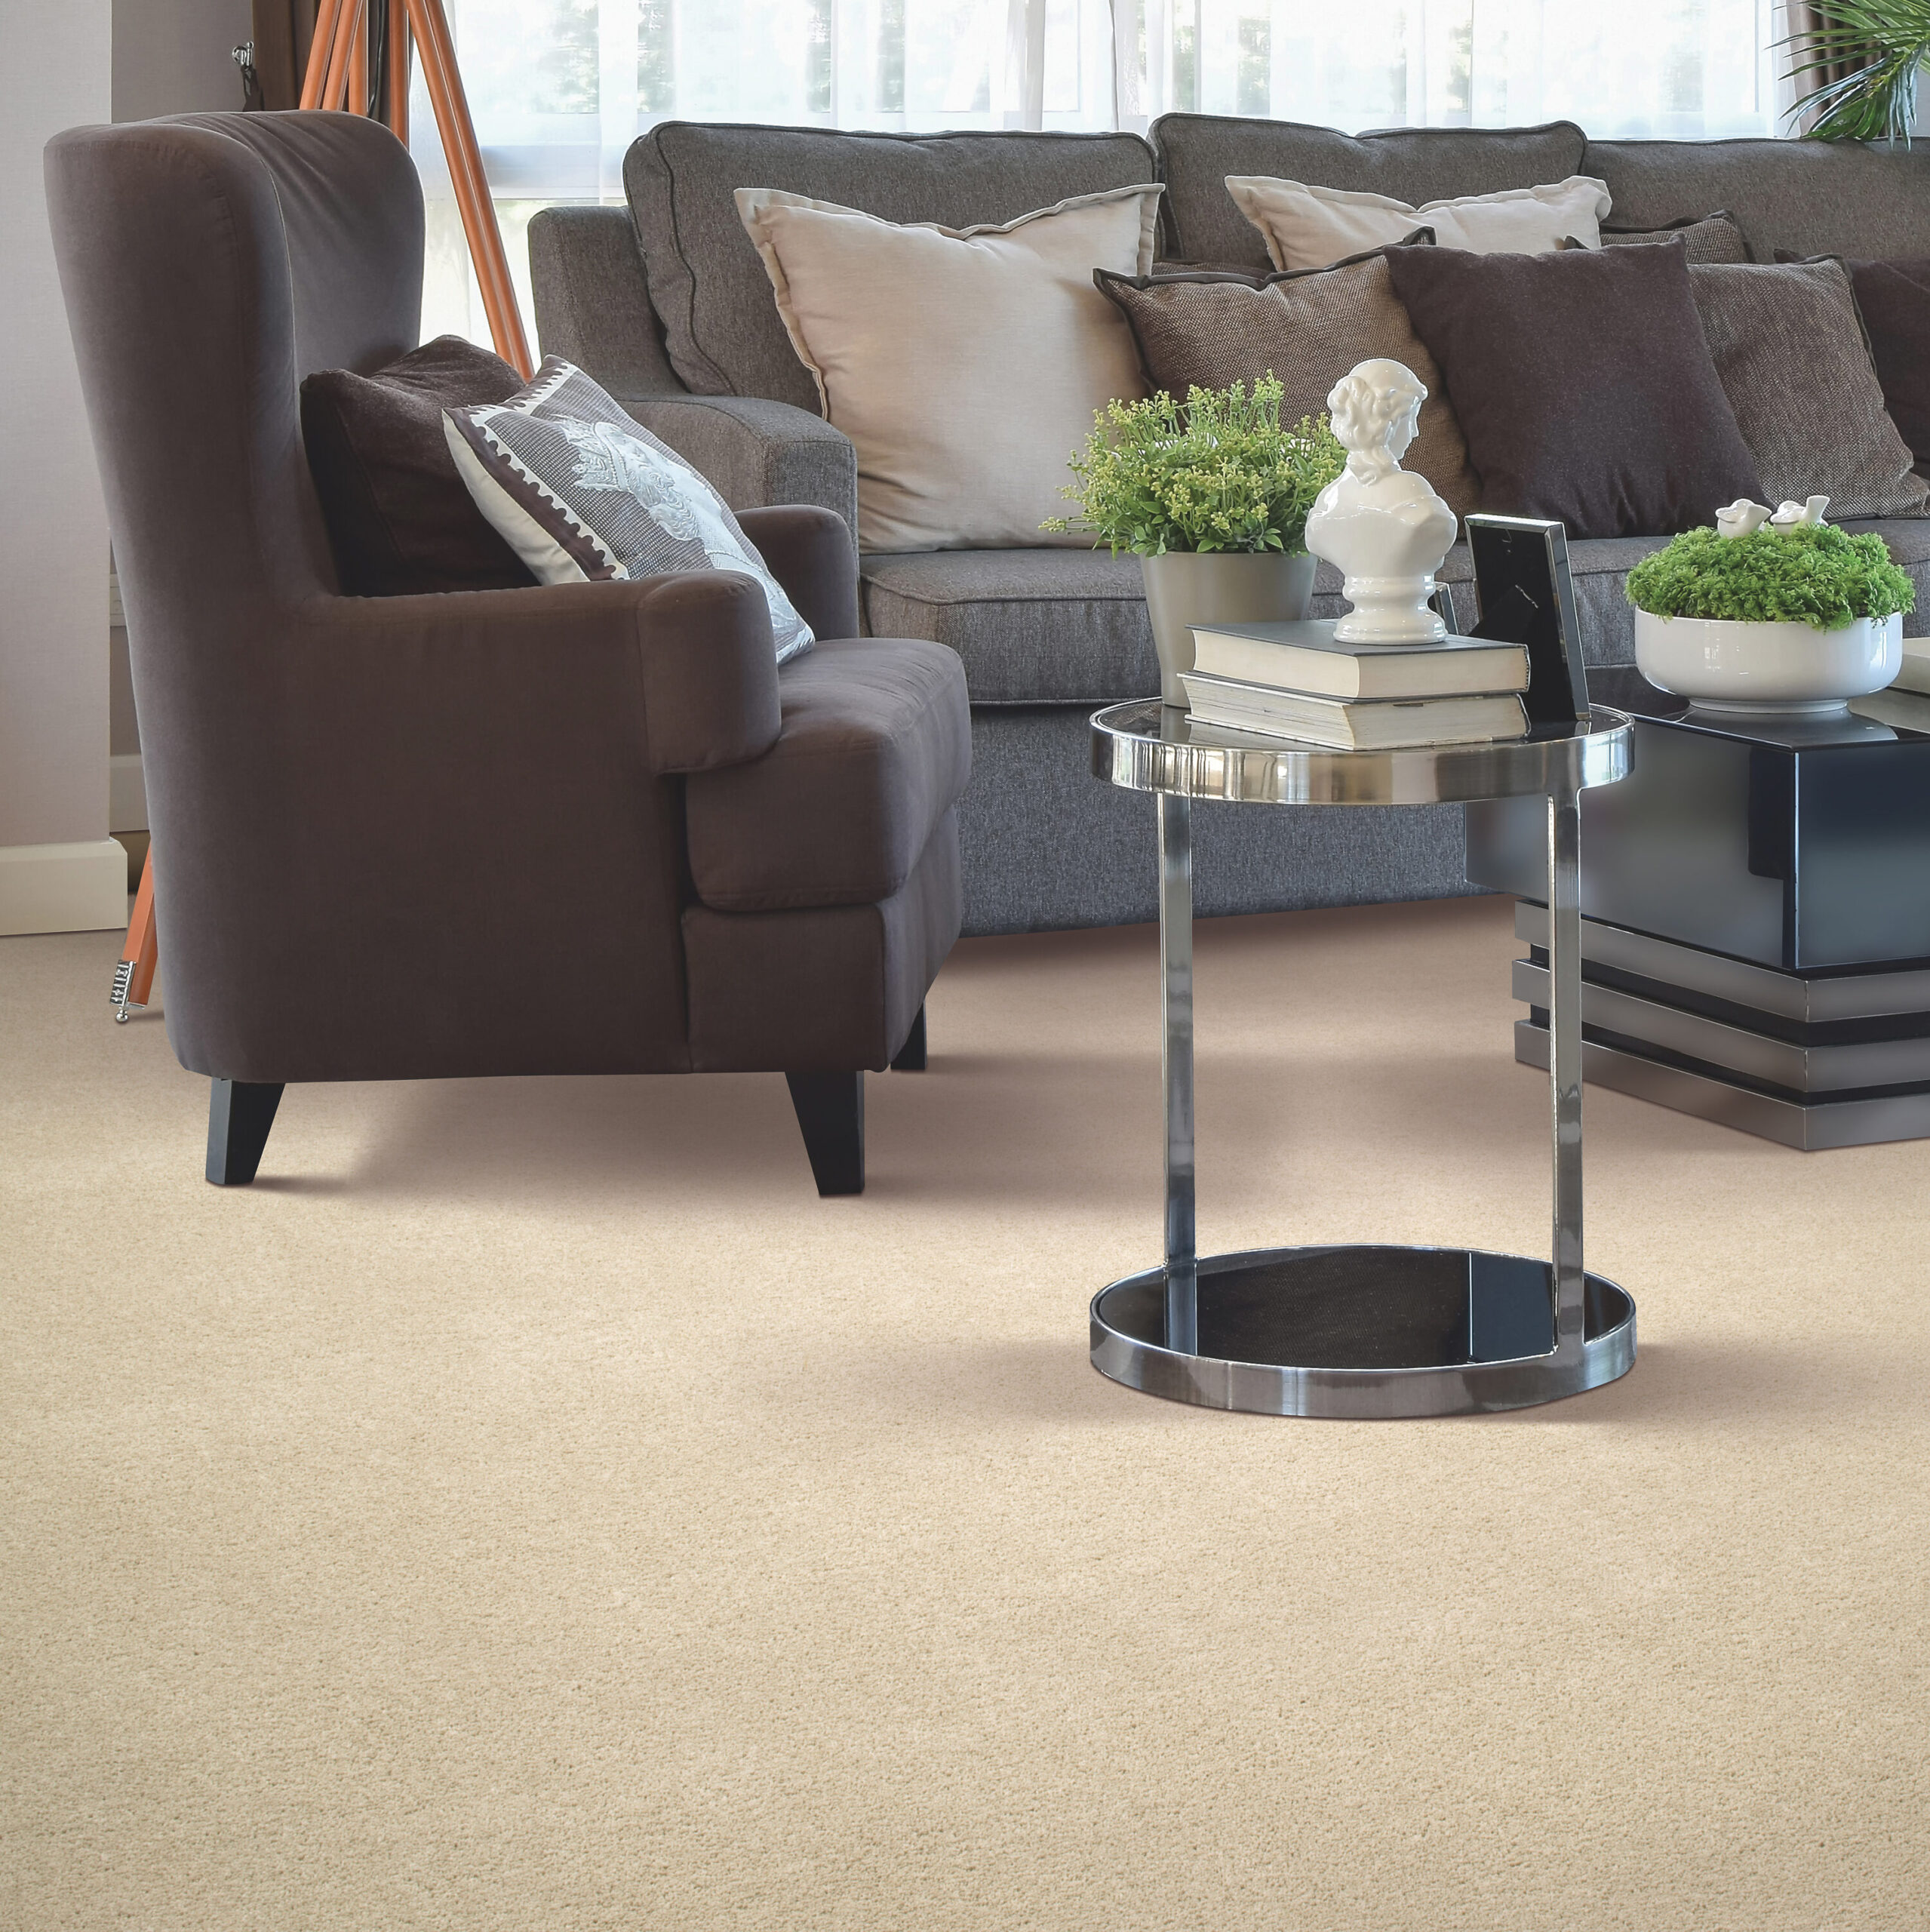 eco-friendly flooring by Mohawk carpet made from recycled bottles, shown in a cozy living room with dark seating and a dark metal coffee table.